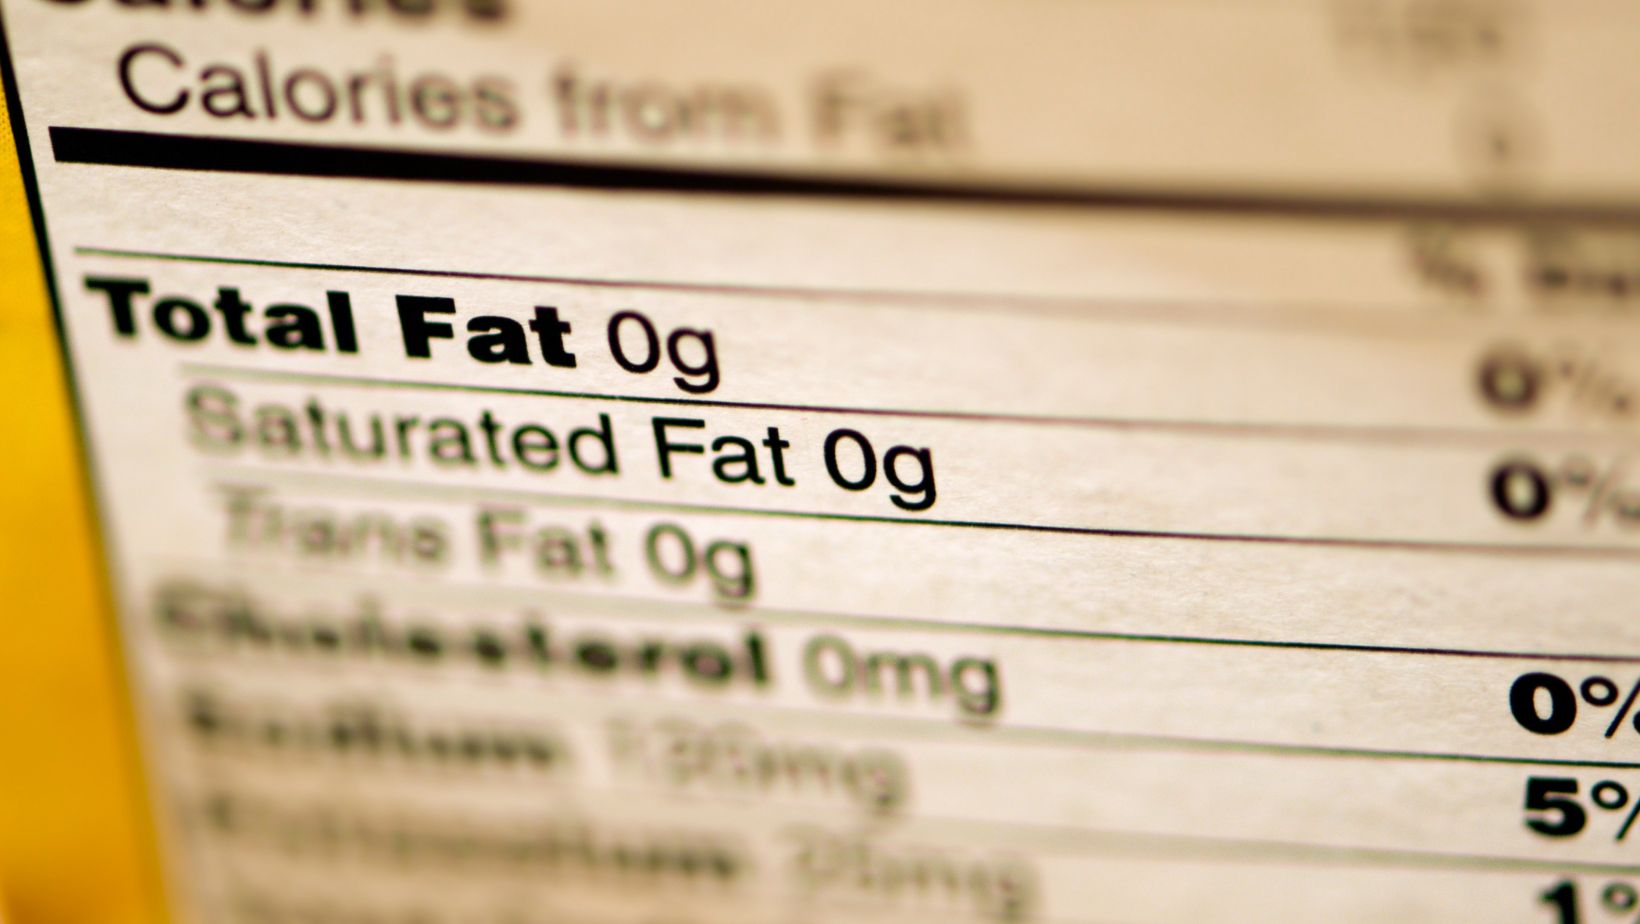 Making Informed Choices About Processed Foods Labeled “Fat-Free” or “Reduced Fat” May